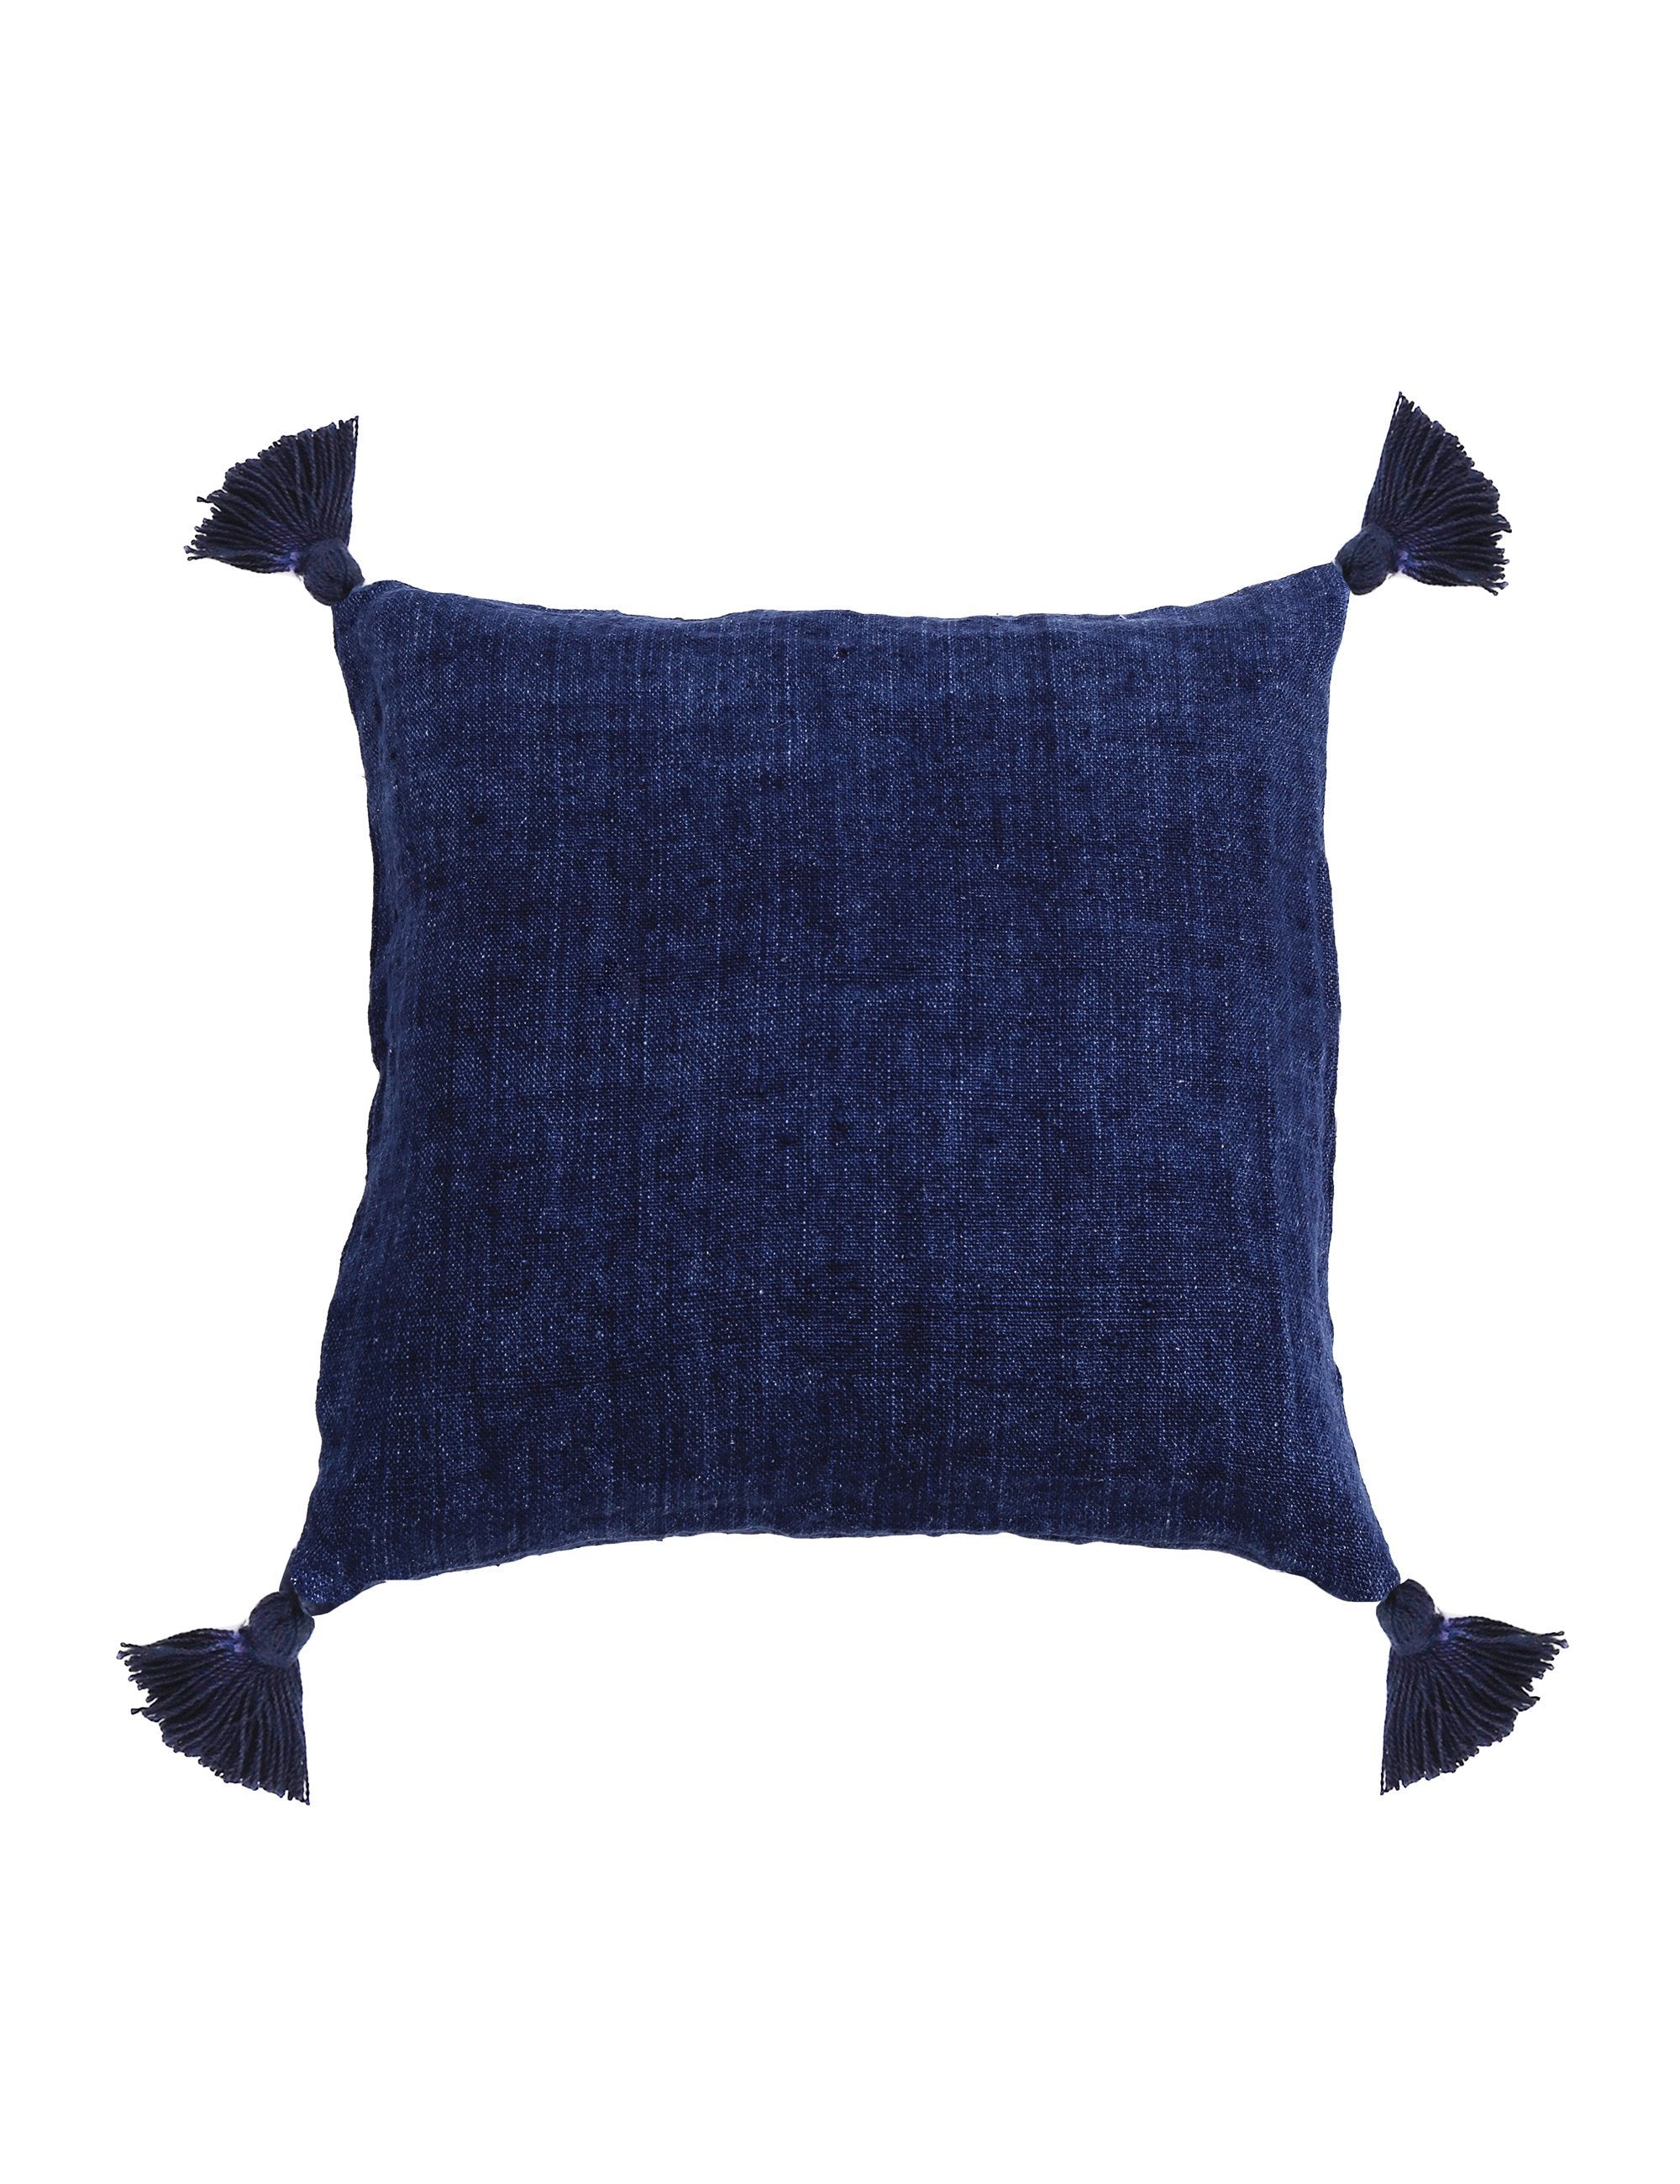 Montauk 20&quot; Pillow with Tassels - 7 colors-Decorative Pillow-Pom Pom at Home